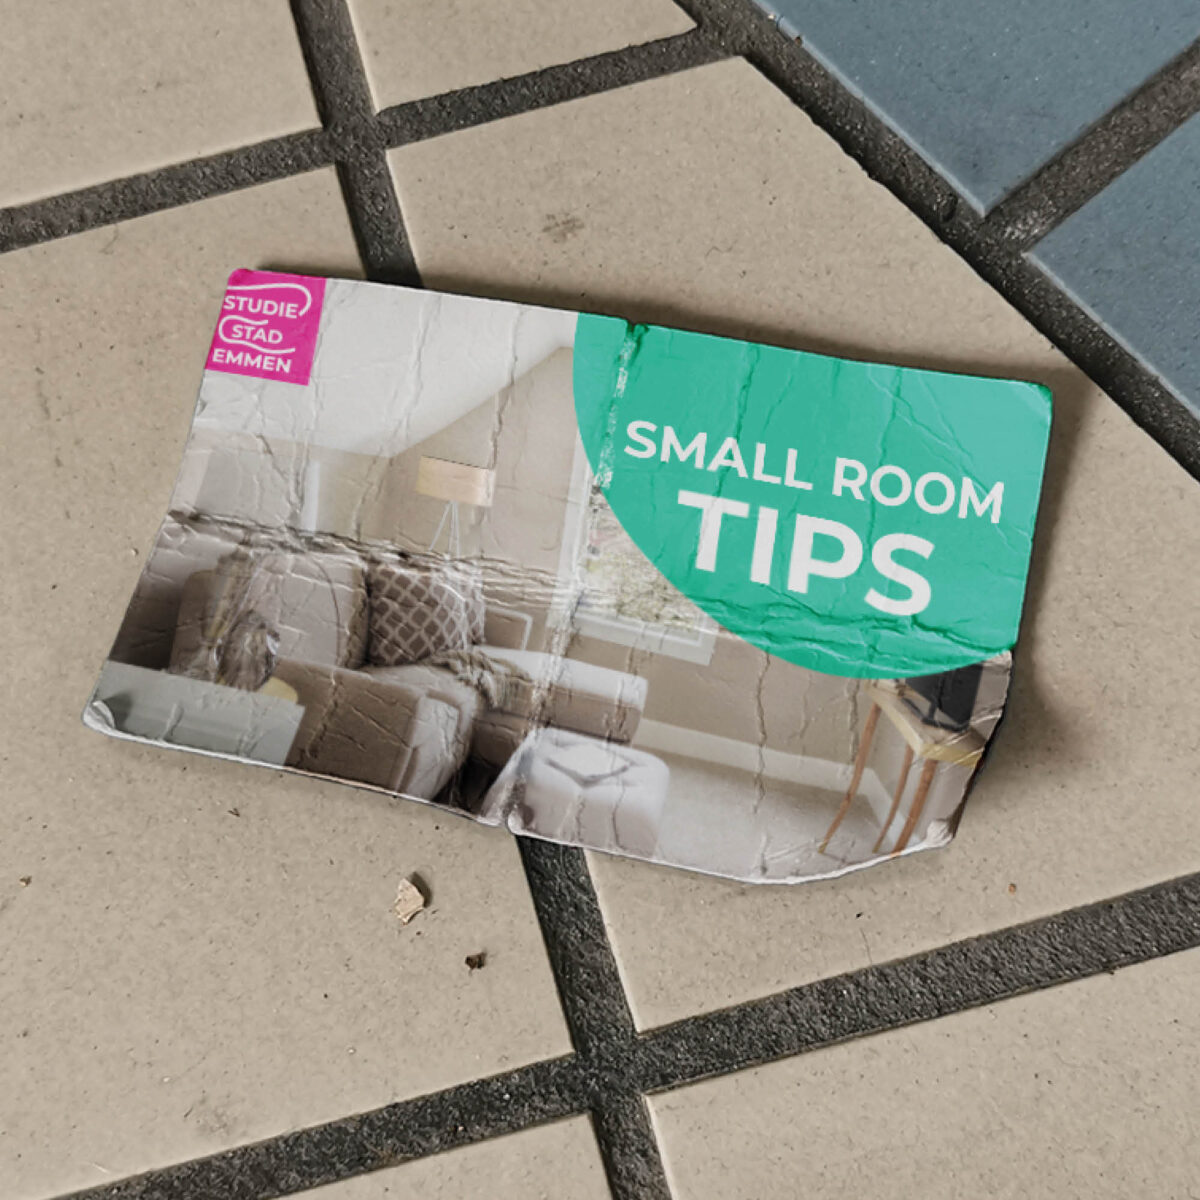 Tips small room